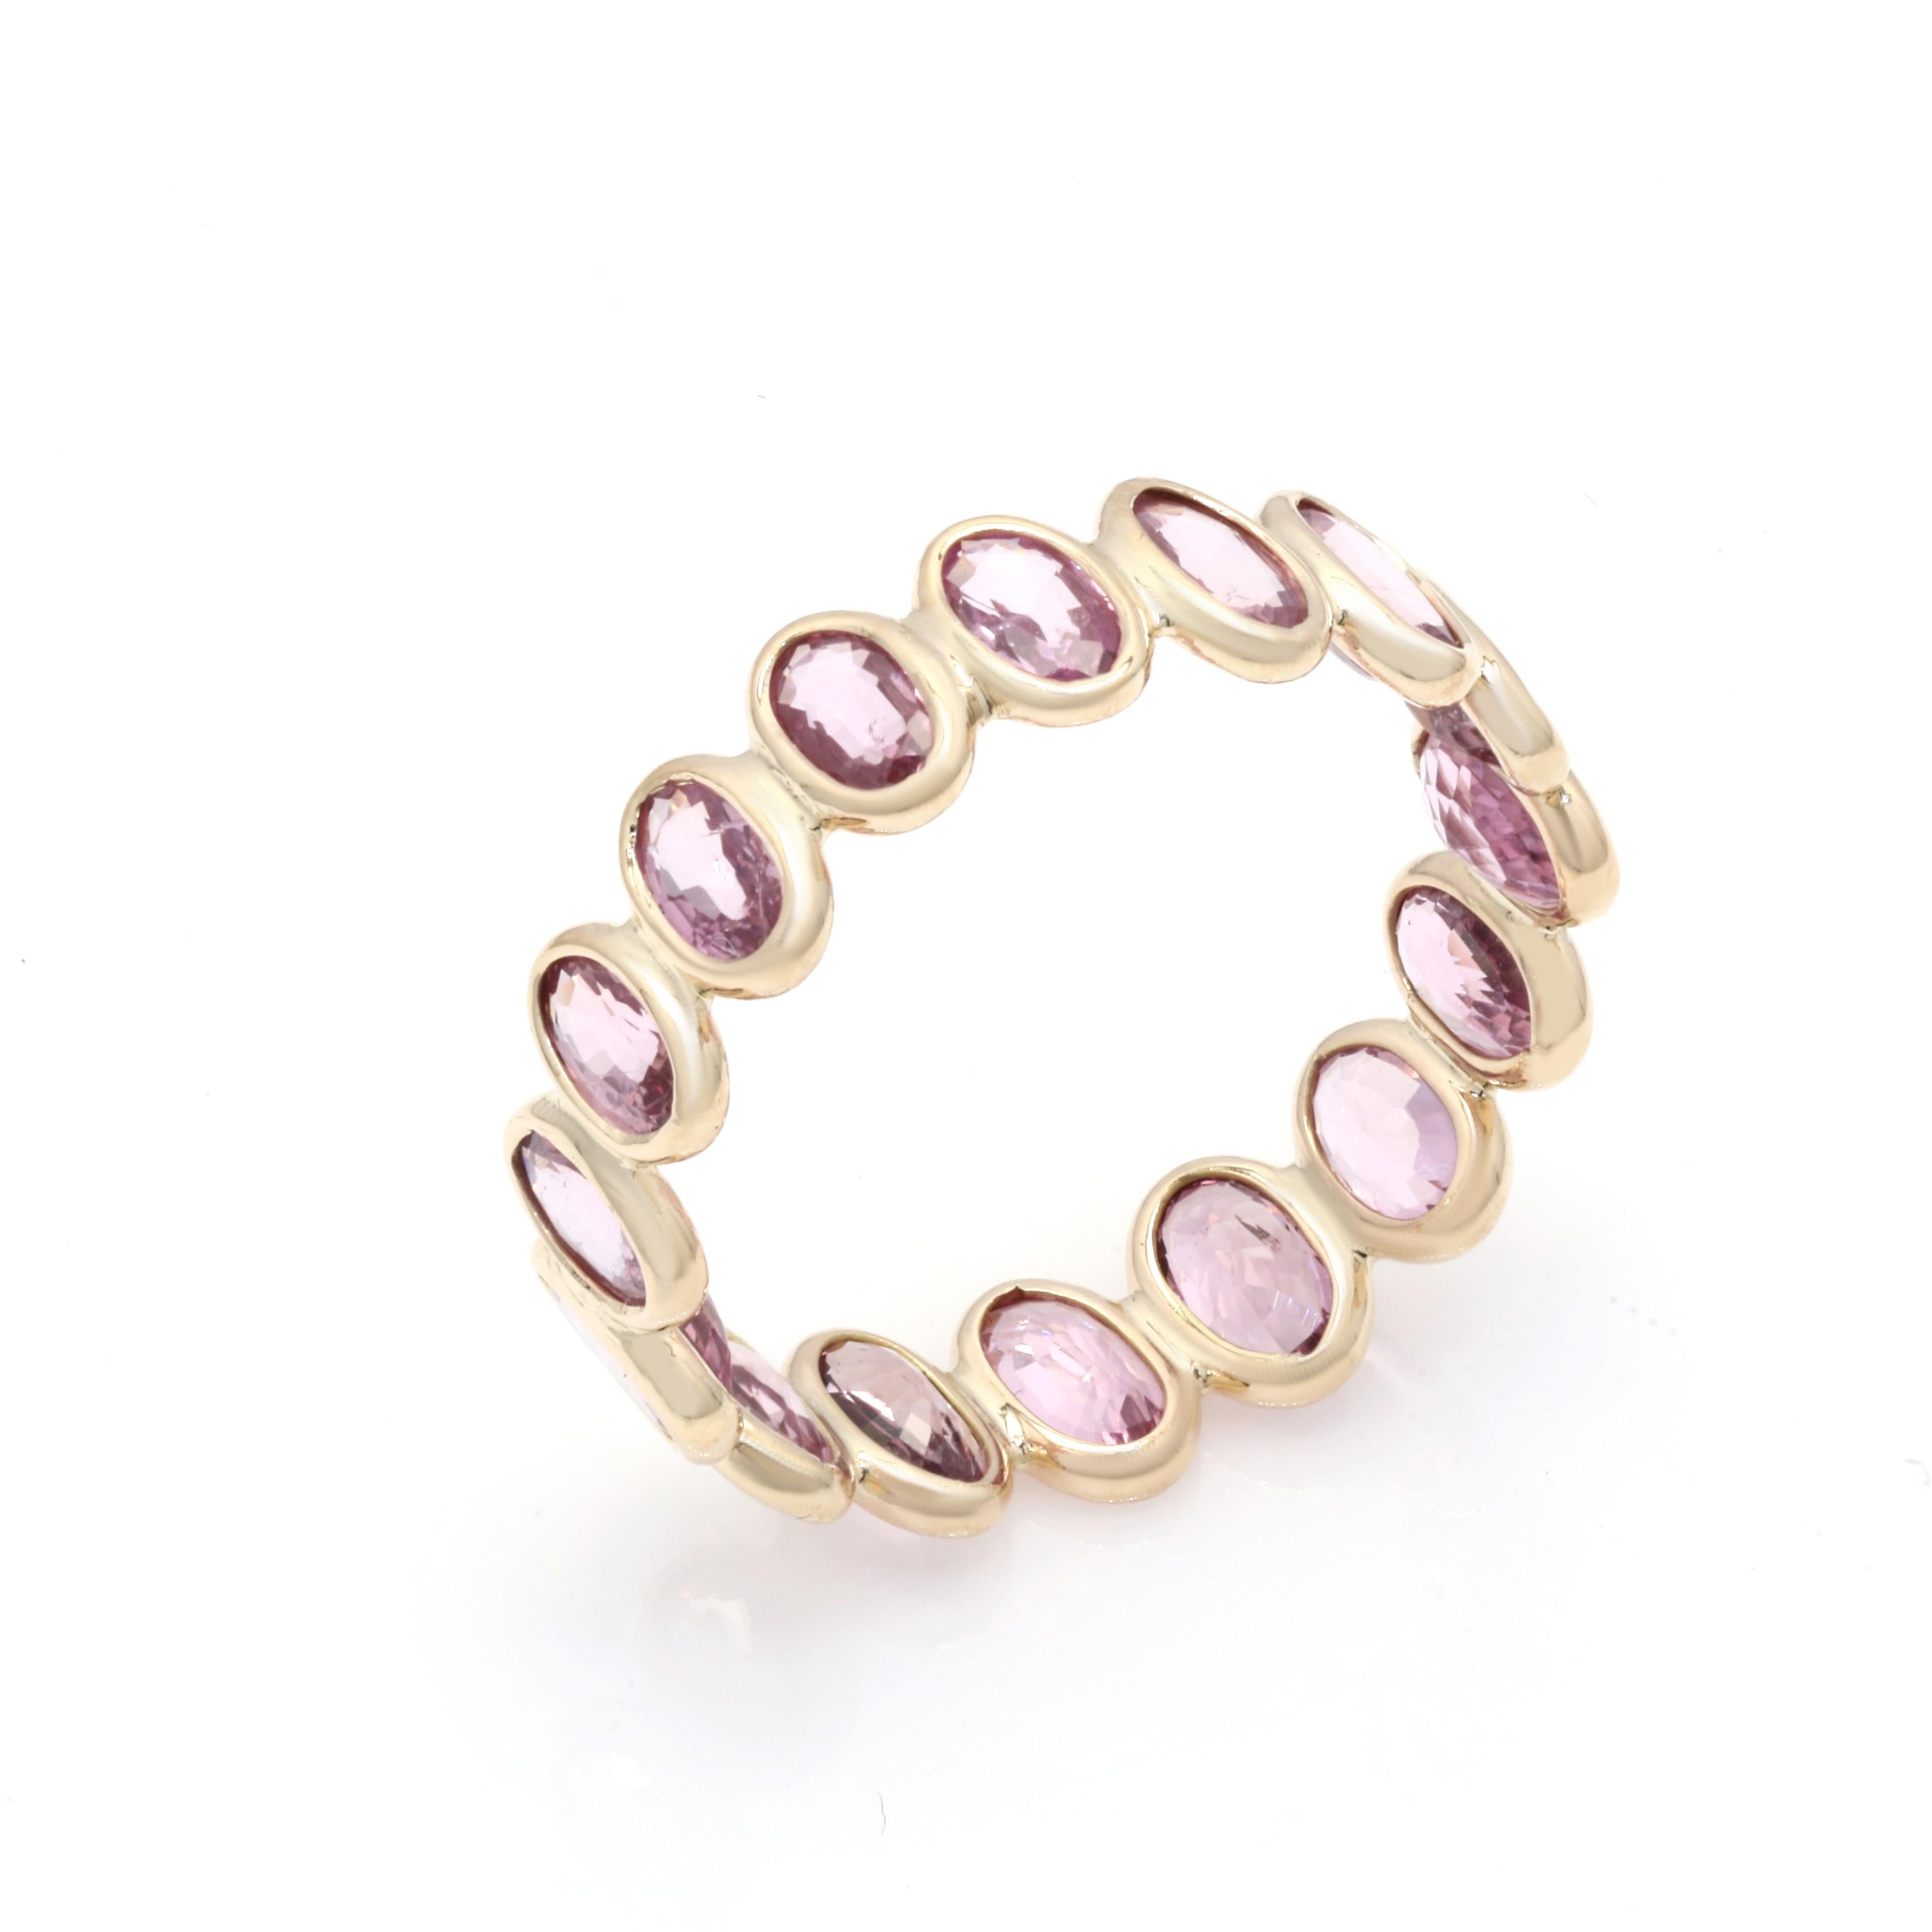 For Sale:  Handmade 4.47 Ct Oval Pink Sapphire Birthstone Eternity Ring in 14K Yellow Gold 4